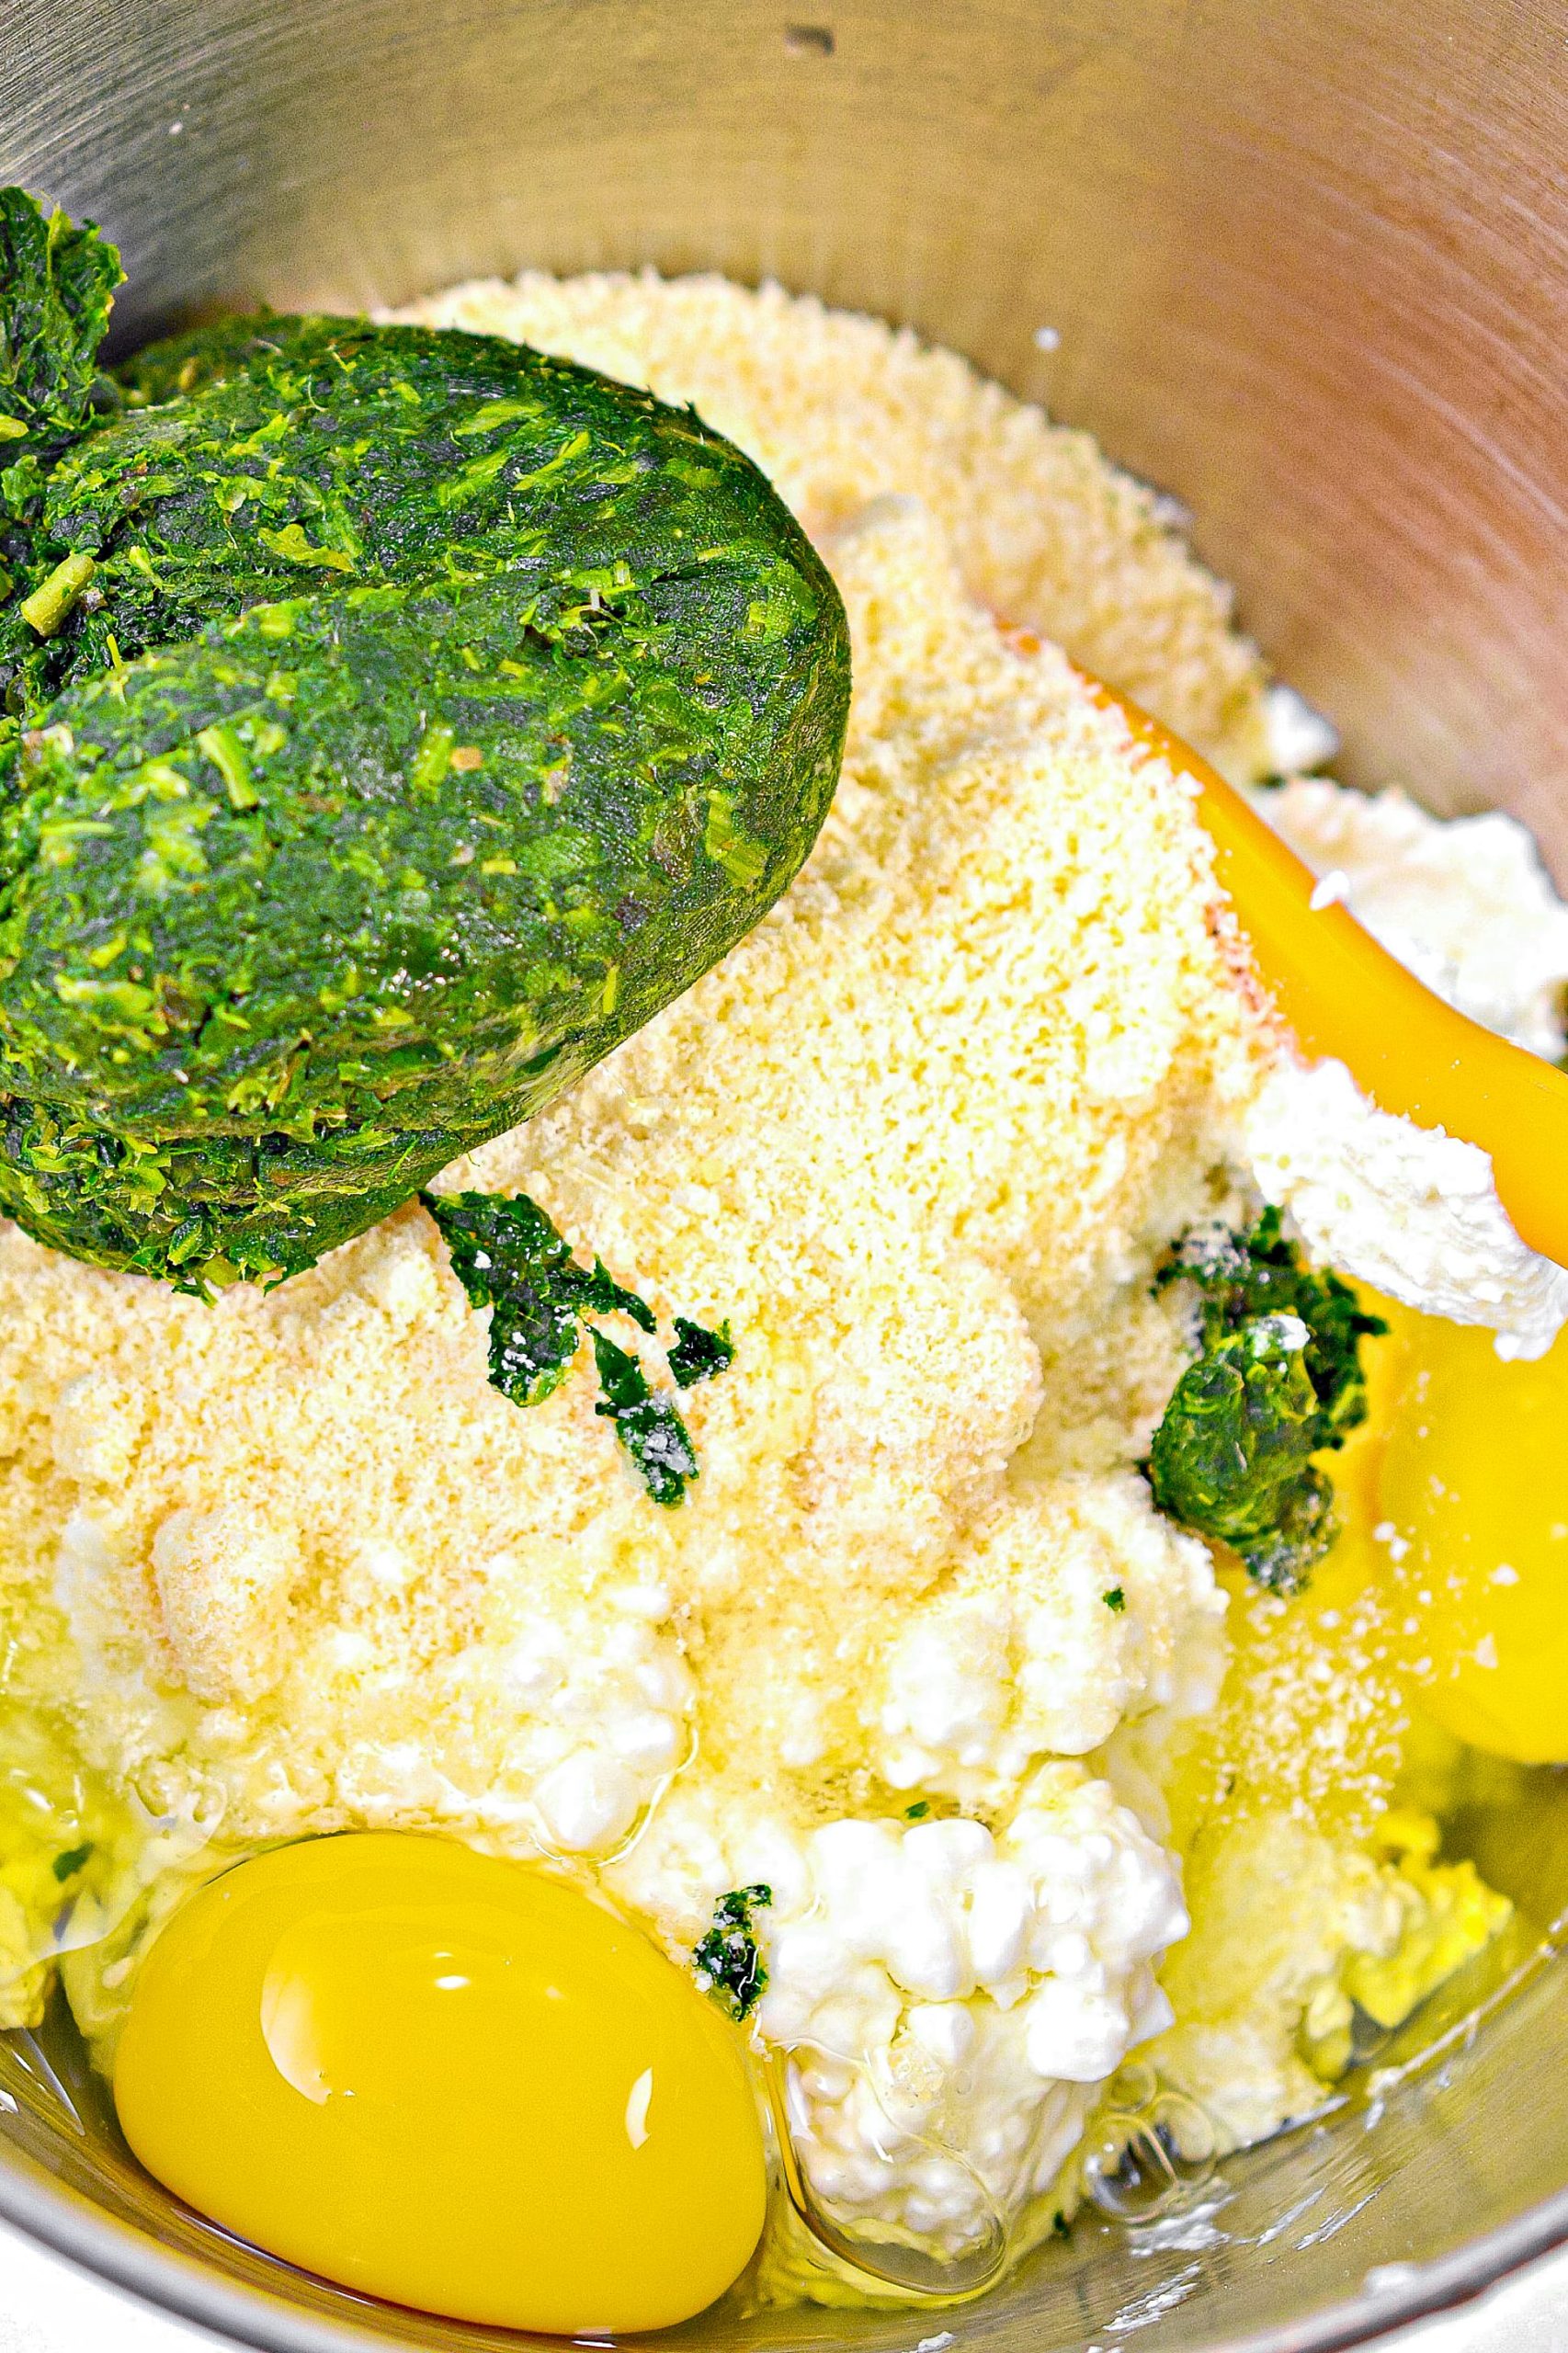  In a mixing bowl, combine the ricotta, cottage cheese, parmesan cheese, eggs and spinach along with salt and pepper to taste. Stir to combine well.